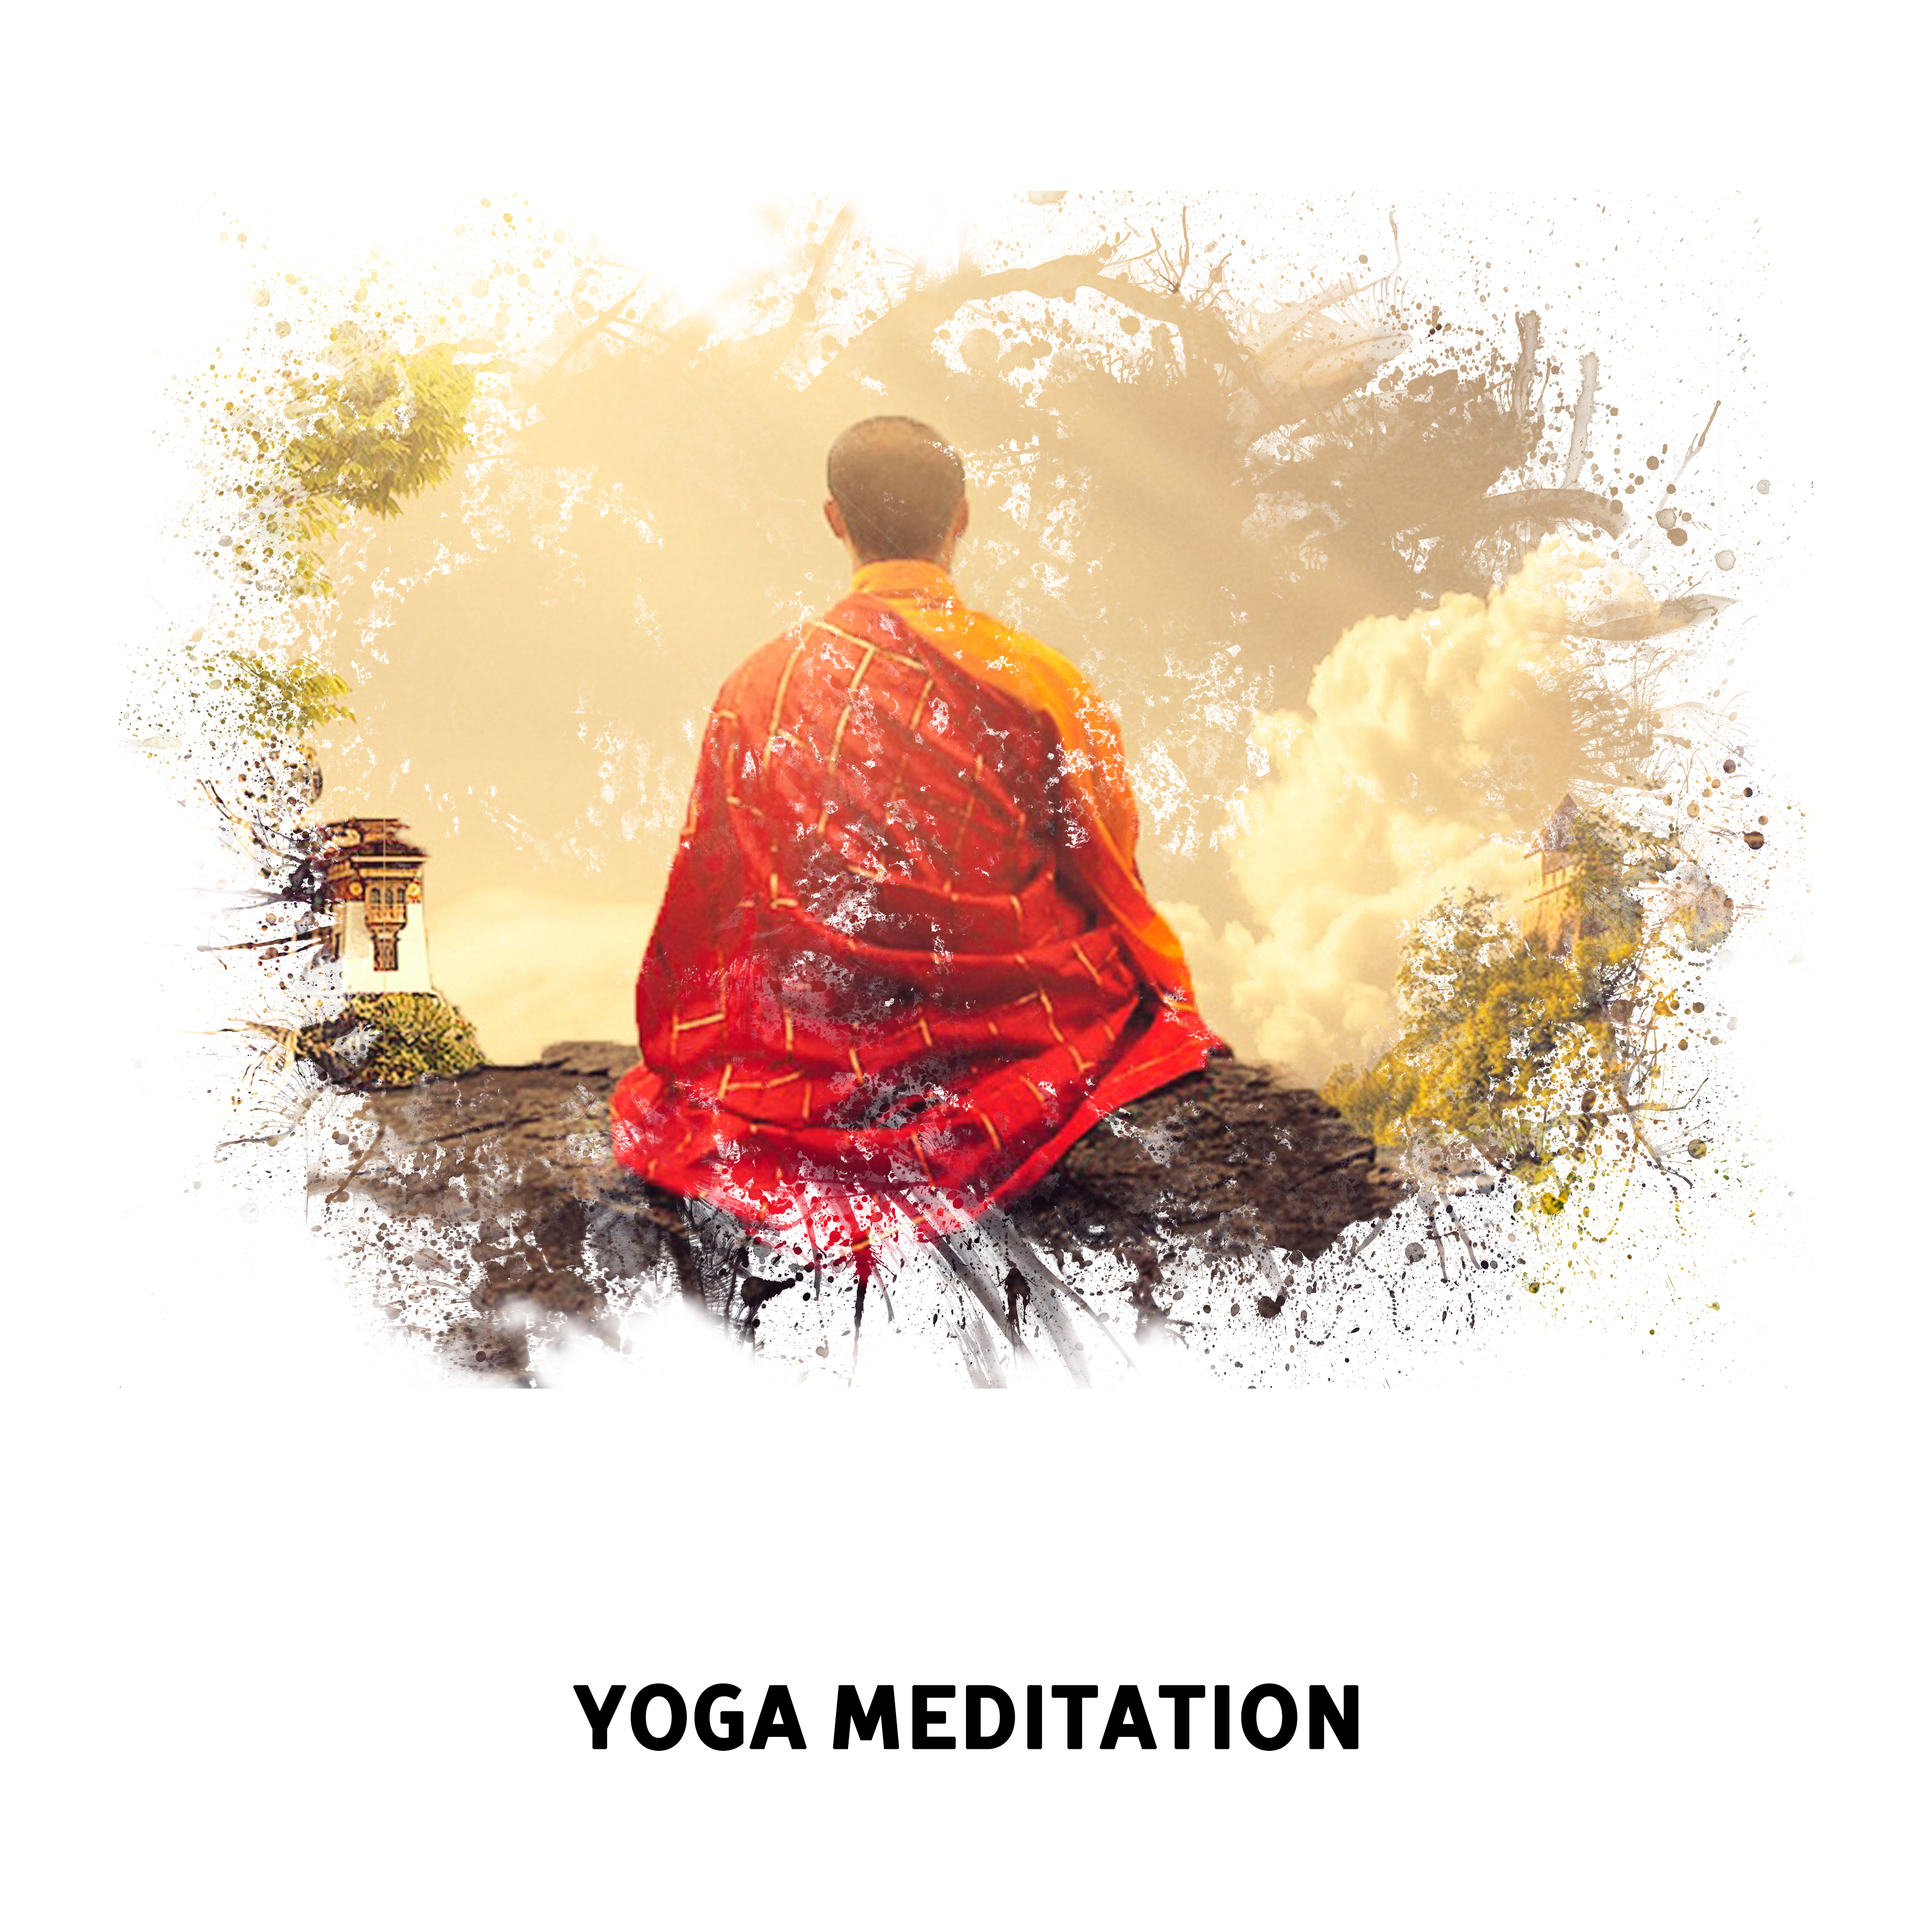 Yoga Meditation  Soft Sounds for Healing, Relaxation, Deep Concentration, Zen Music, Stress Relief, Peaceful Music to Calm Down, Chakra Balancing, Meditate